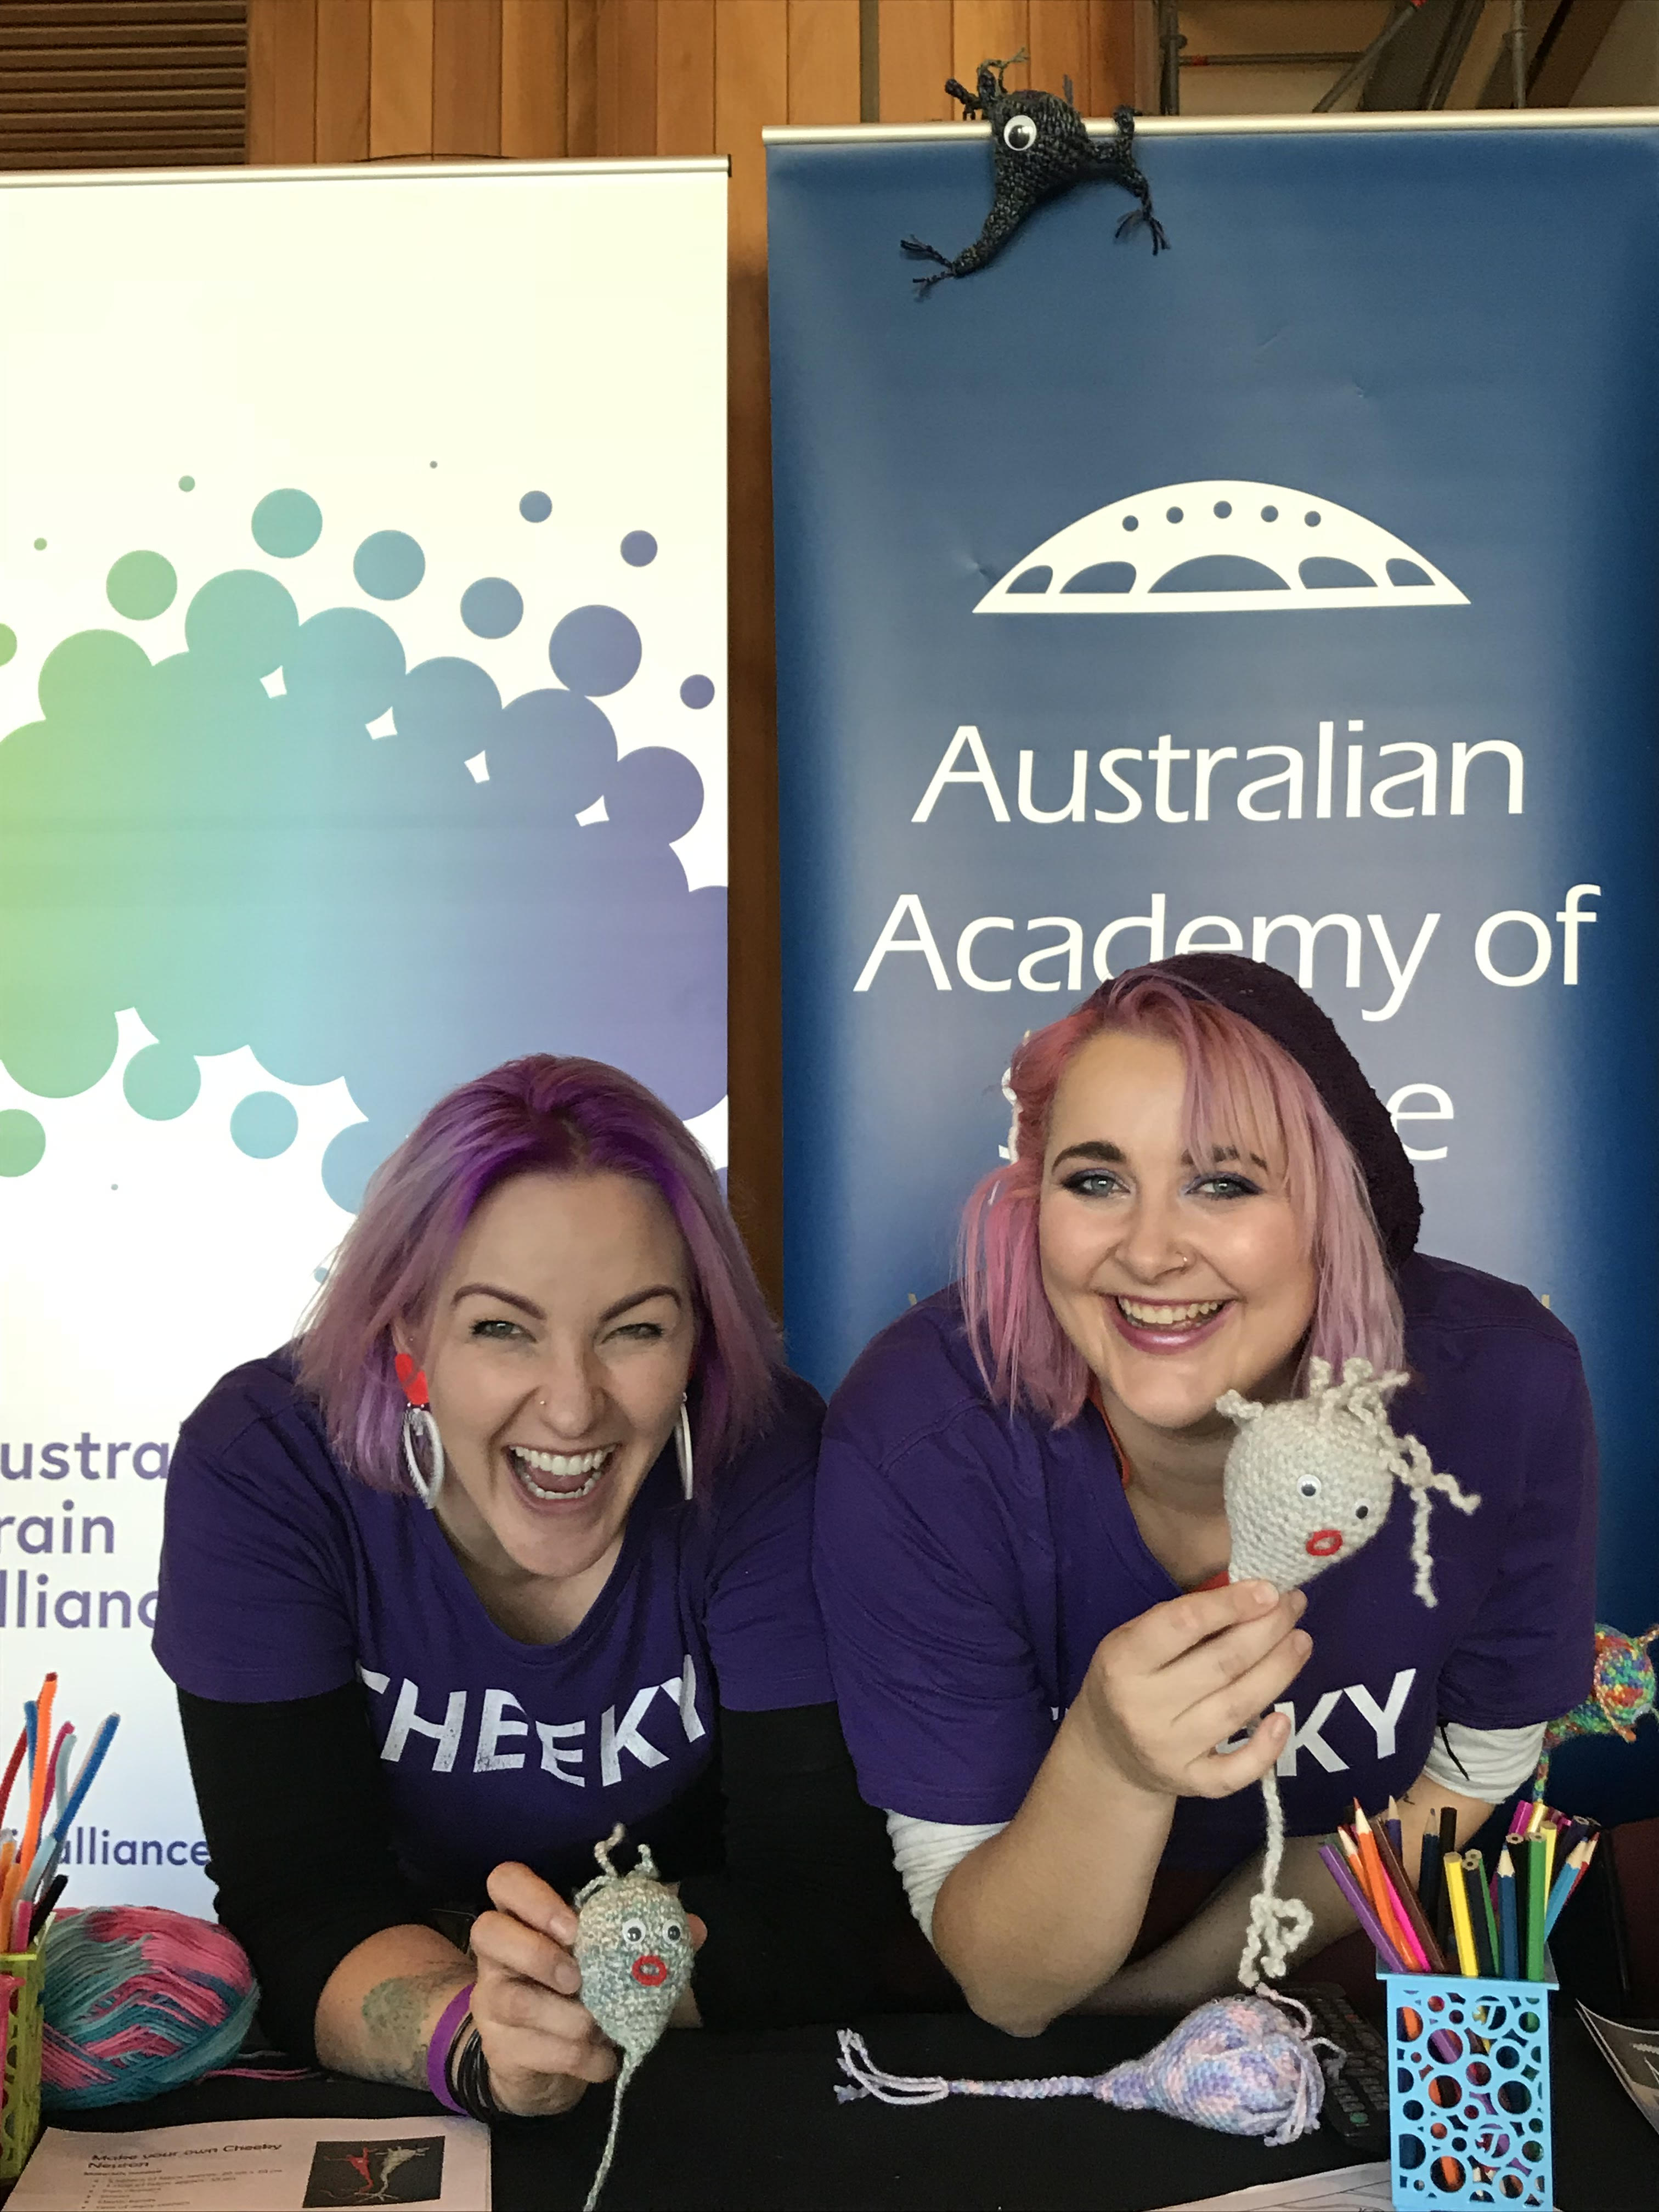 Jo Adams, Kendal Fairweather, Nix & Nellie spreading epilepsy awareness & being a bit cheeky on Purple Day at Parliament House